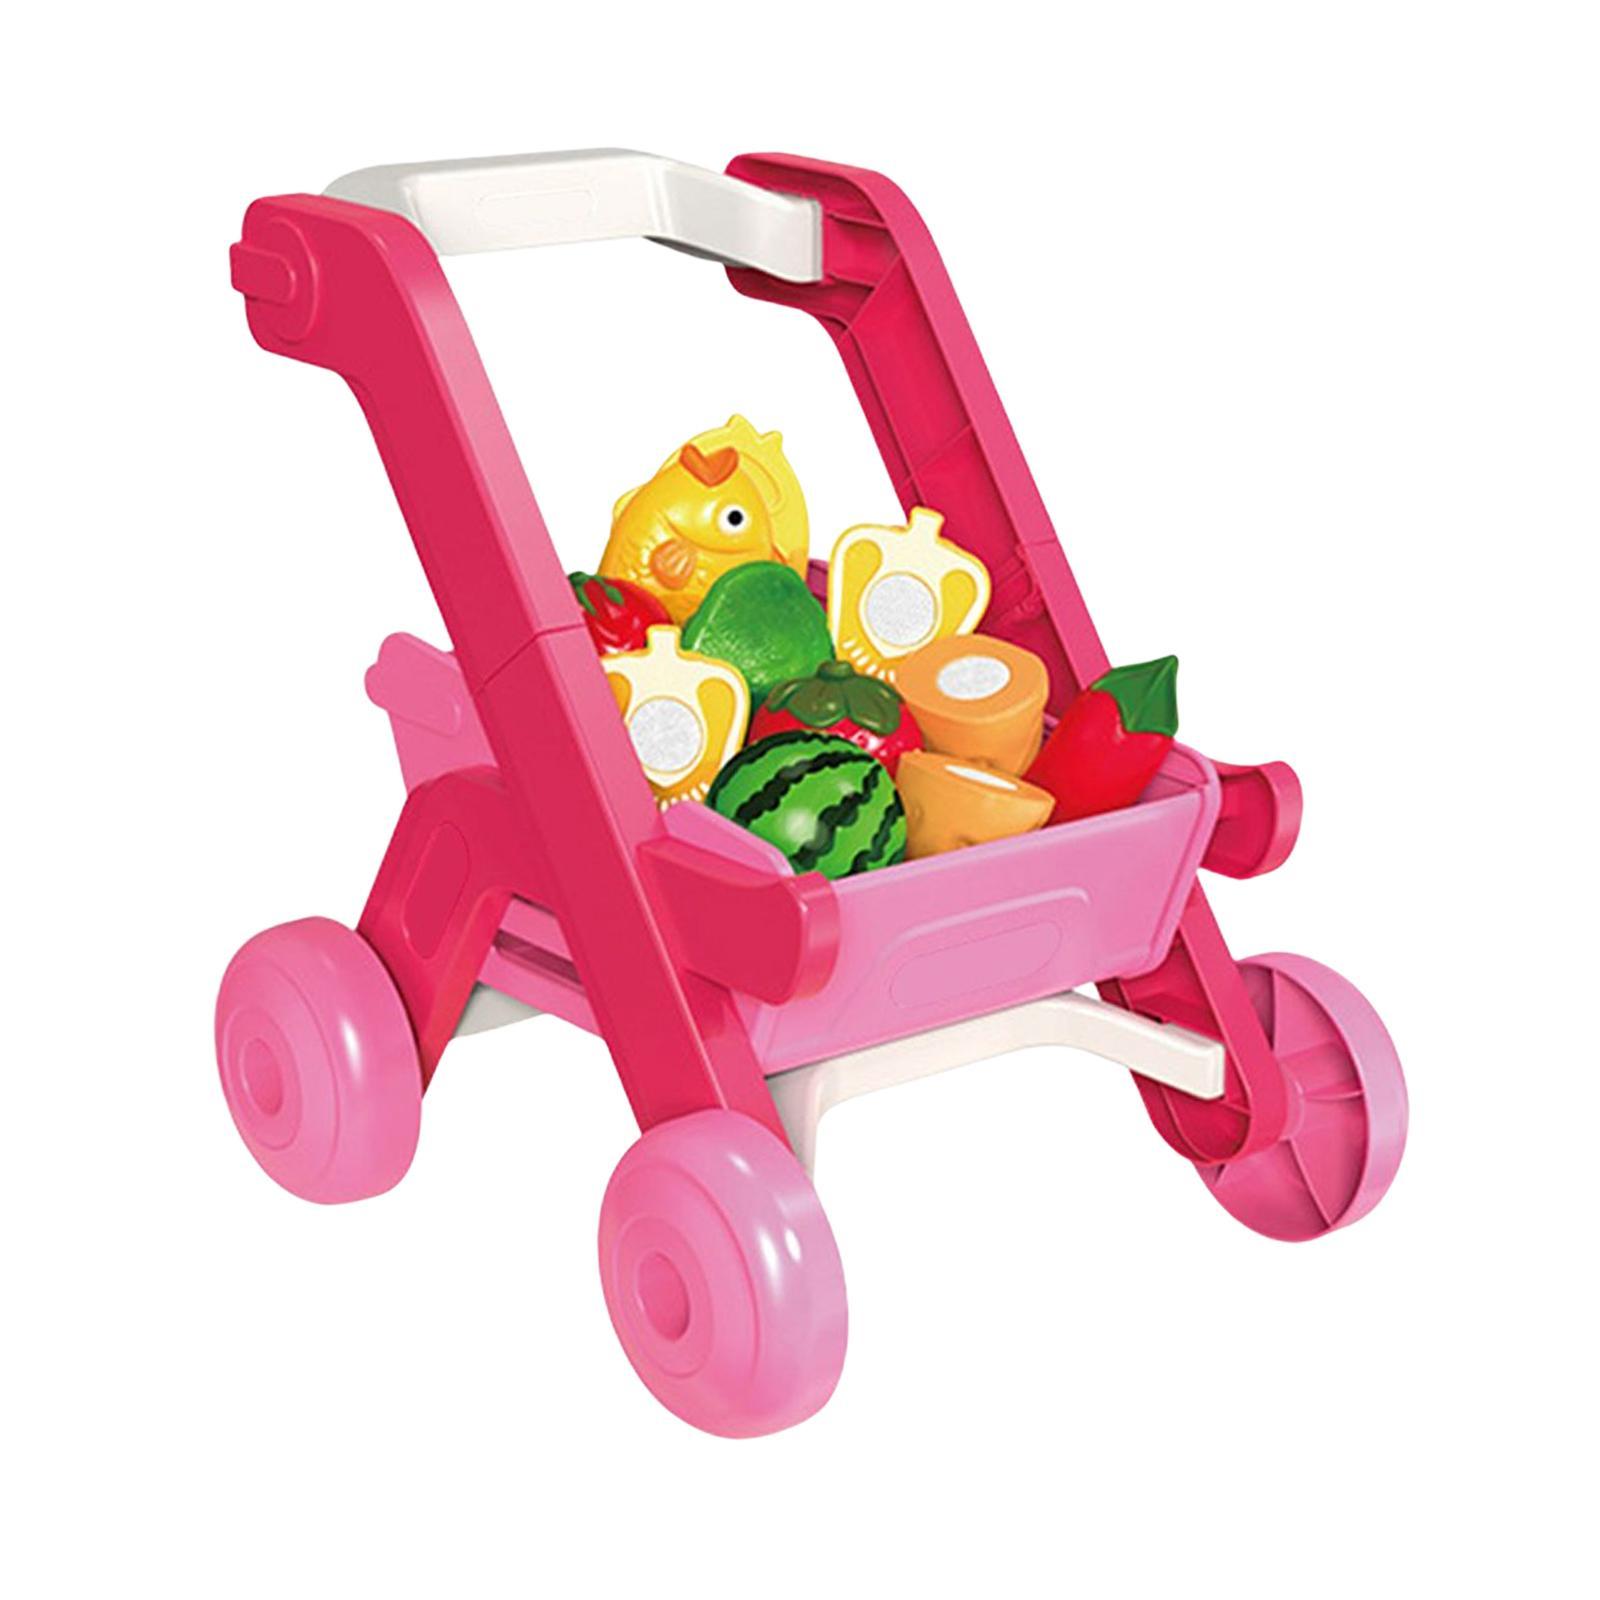 Shopping Trolley Cart kids Shopping Cart Toy Pretend Play Gifts